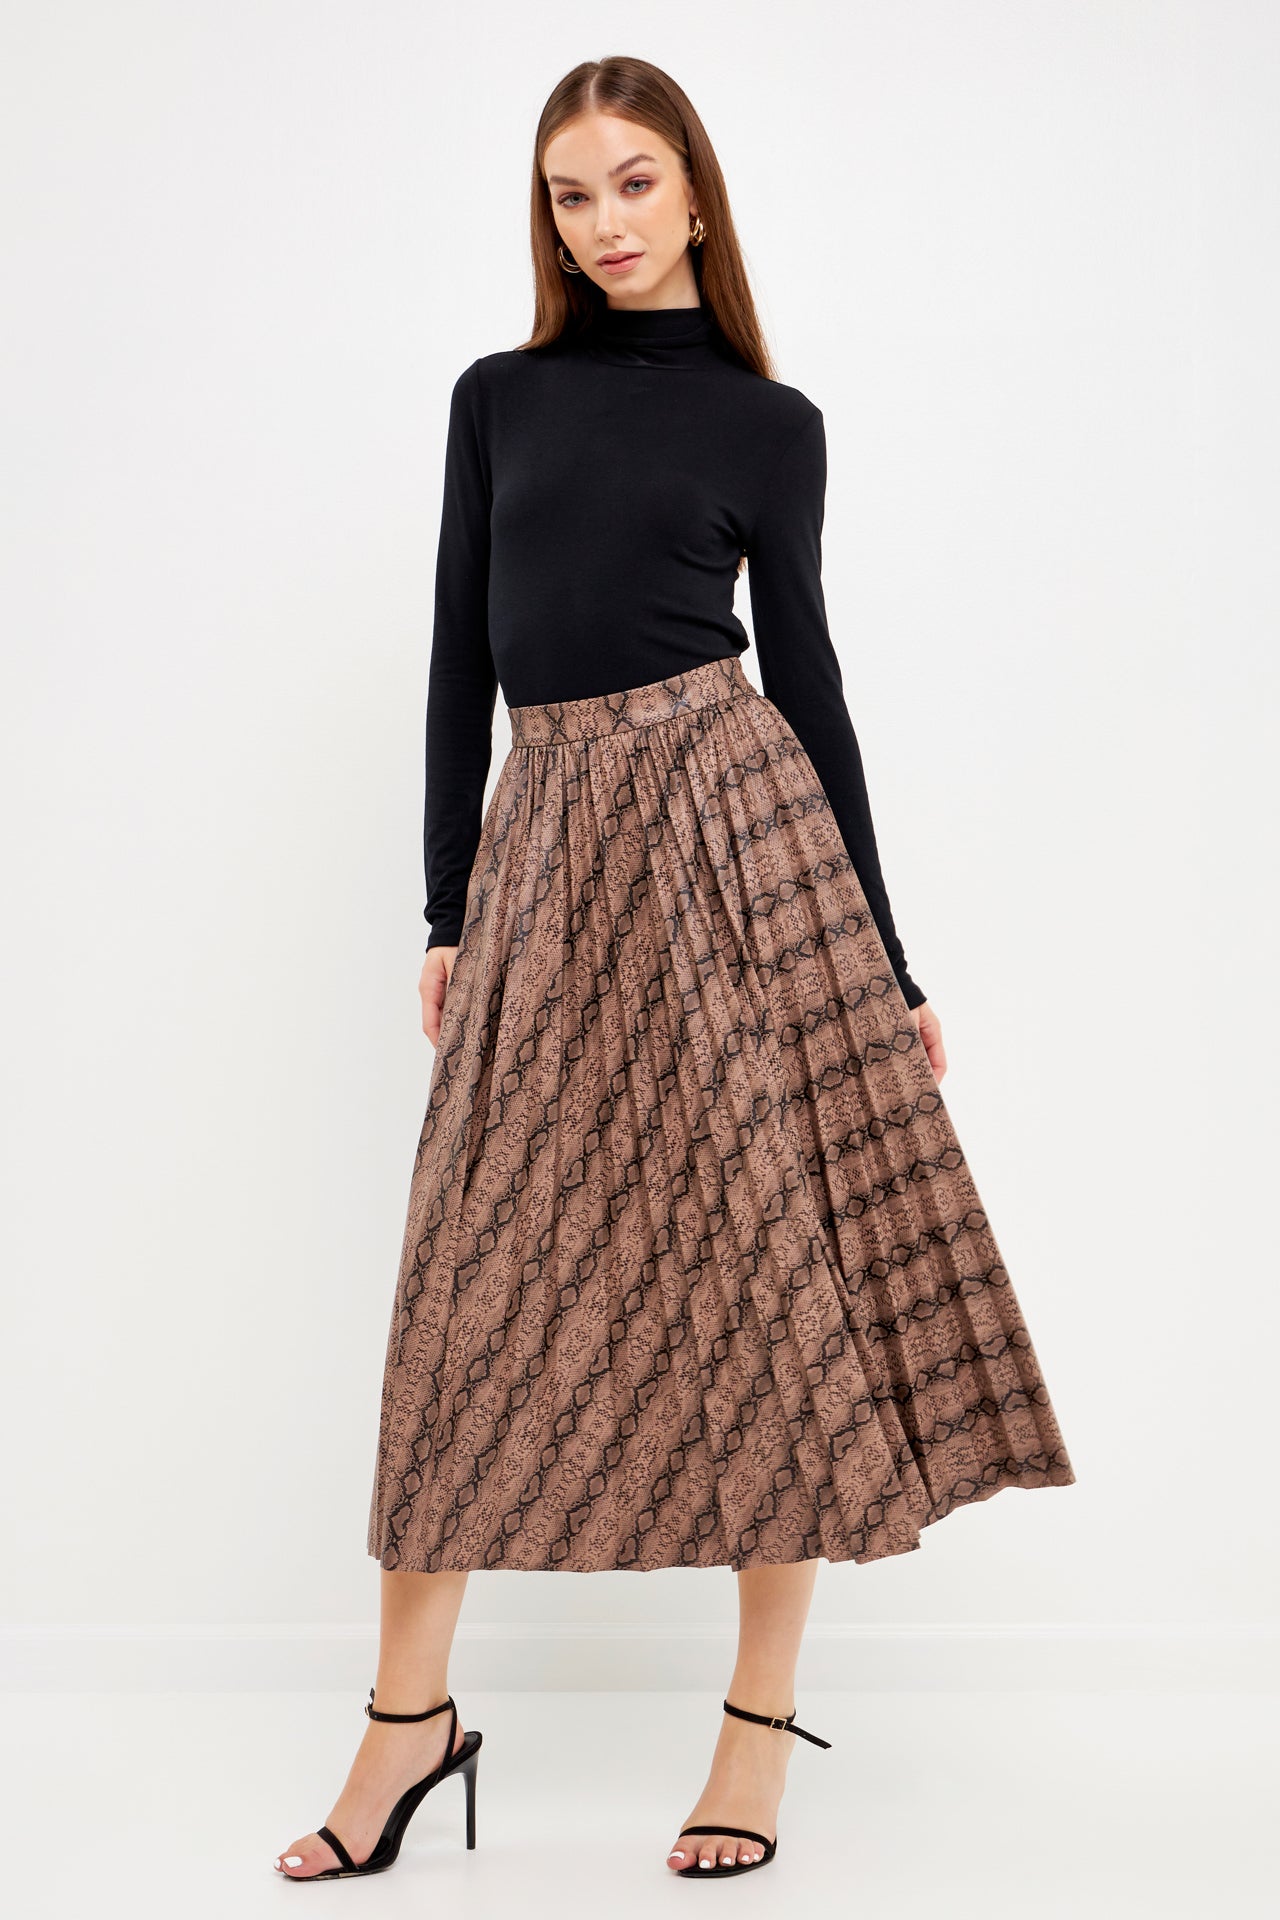 ENDLESS ROSE - Snake Print Pleated Midi Skirt - SKIRTS available at Objectrare